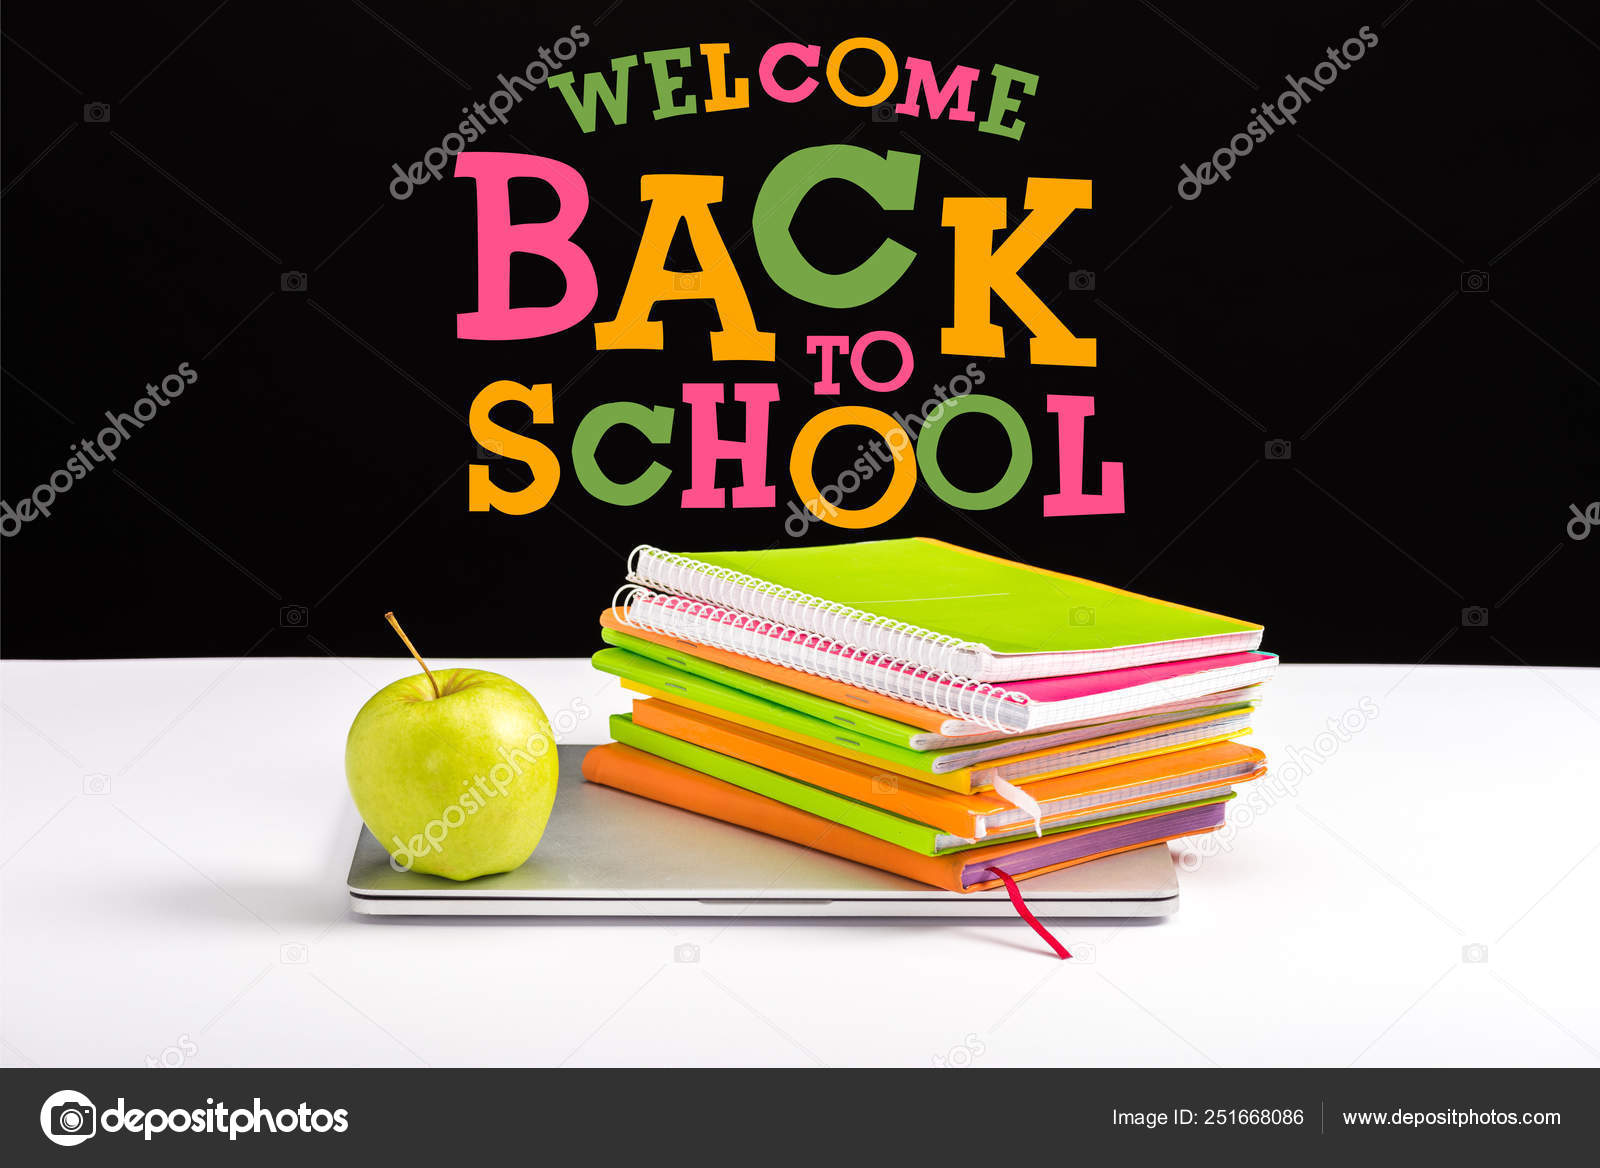 ᐈ Welcome Back To School Stock Pictures Royalty Free Welcome Back To School Images Download On Depositphotos